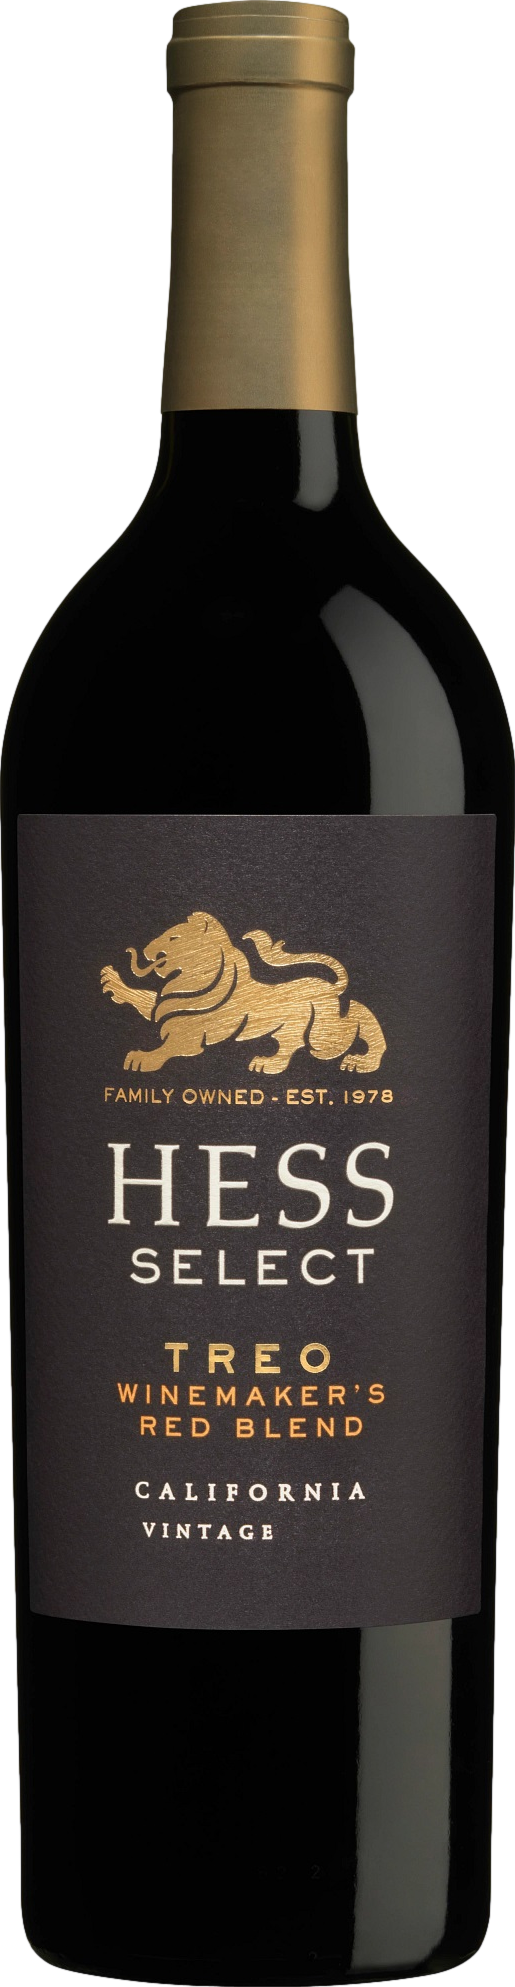 Hess Select Treo Winemaker%27s Blend 2019 Hess Collection 8wines DACH